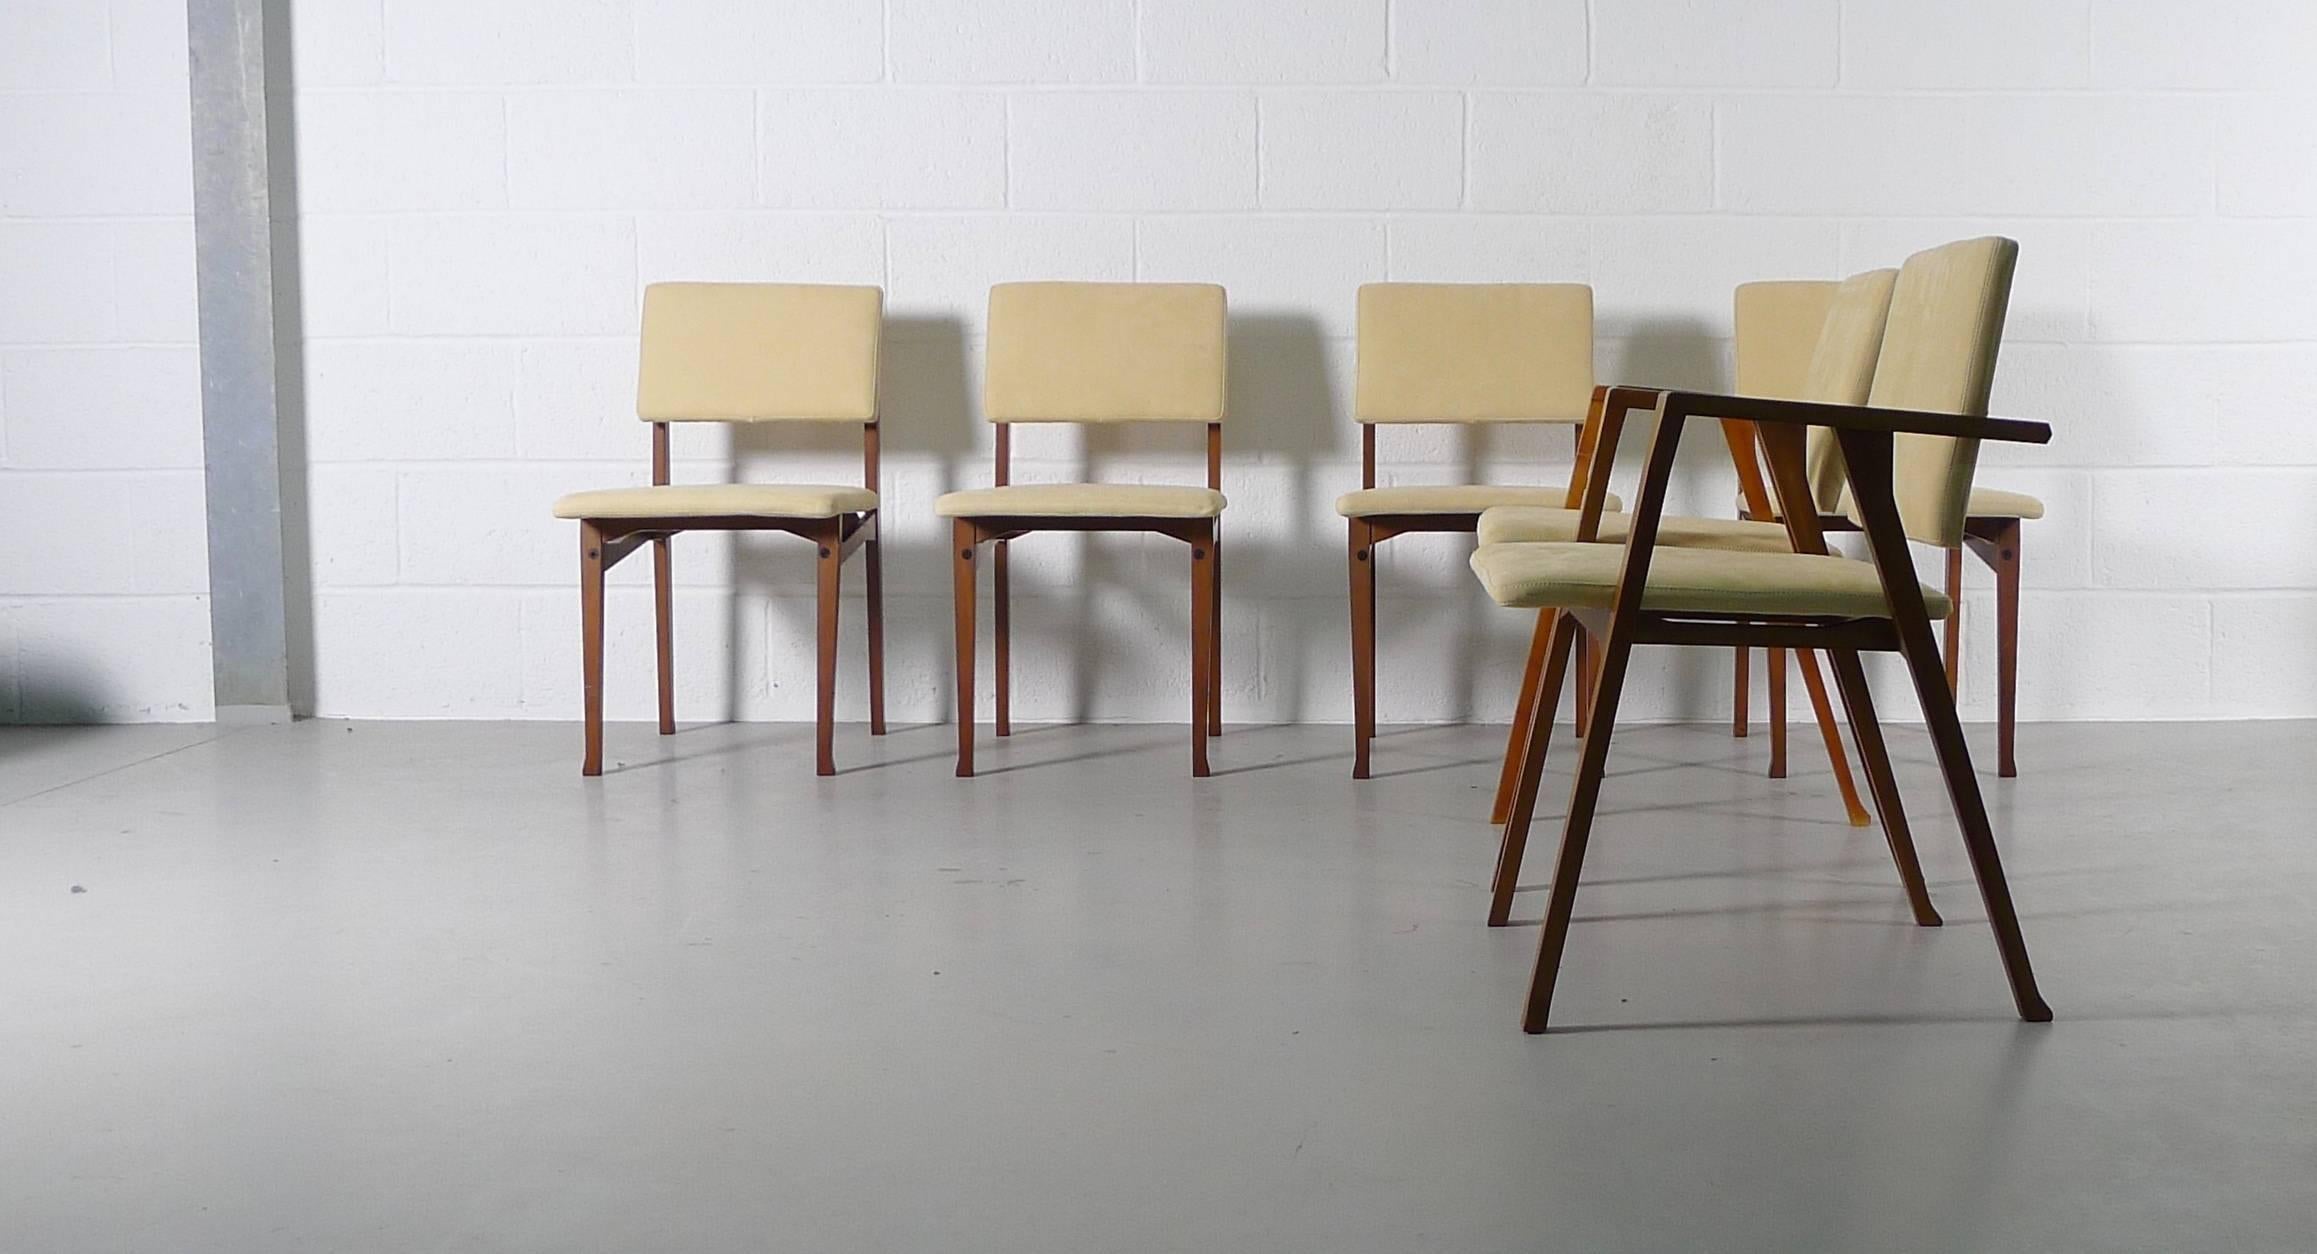 Franco Albini for Poggi, Italy. A set of two Luisa and four Luisella dining chairs, all professionally reupholstered in Supersoft Nubuck leather. Armchairs feature the wonderful “knuckle“ joints on the arms, the side chairs are rare.